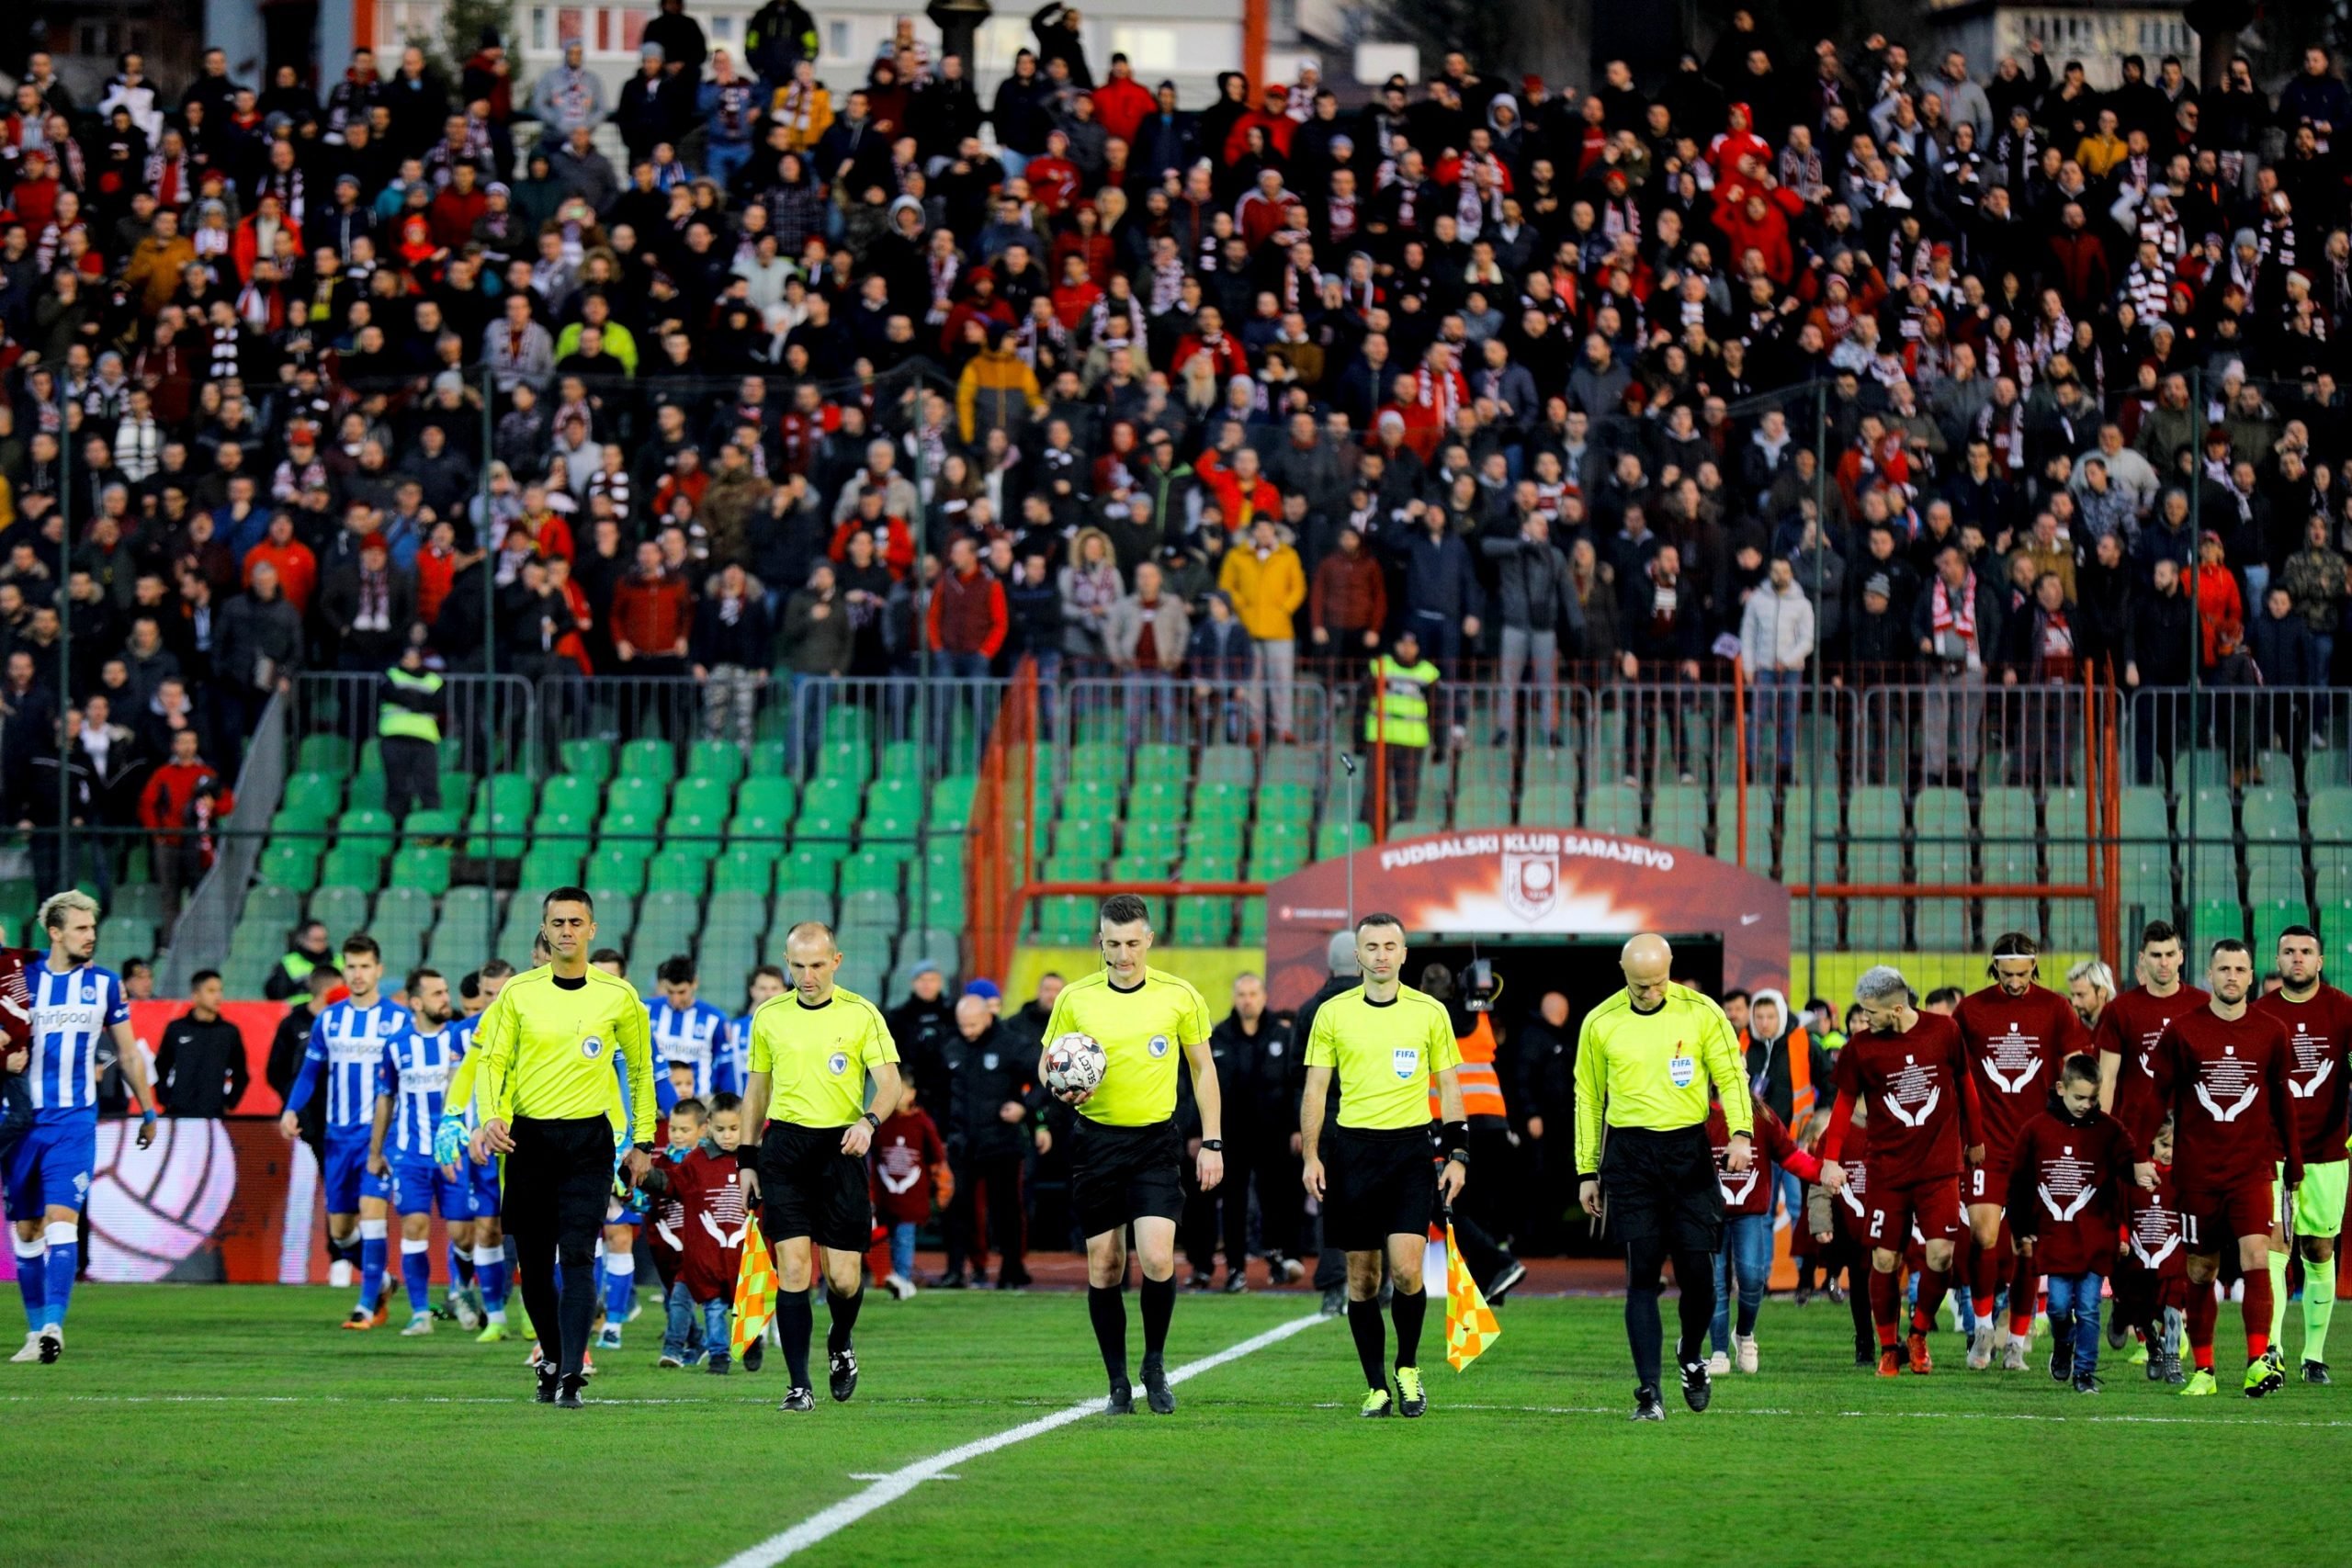 Celtic won't have to deal with Sarajevo's fans